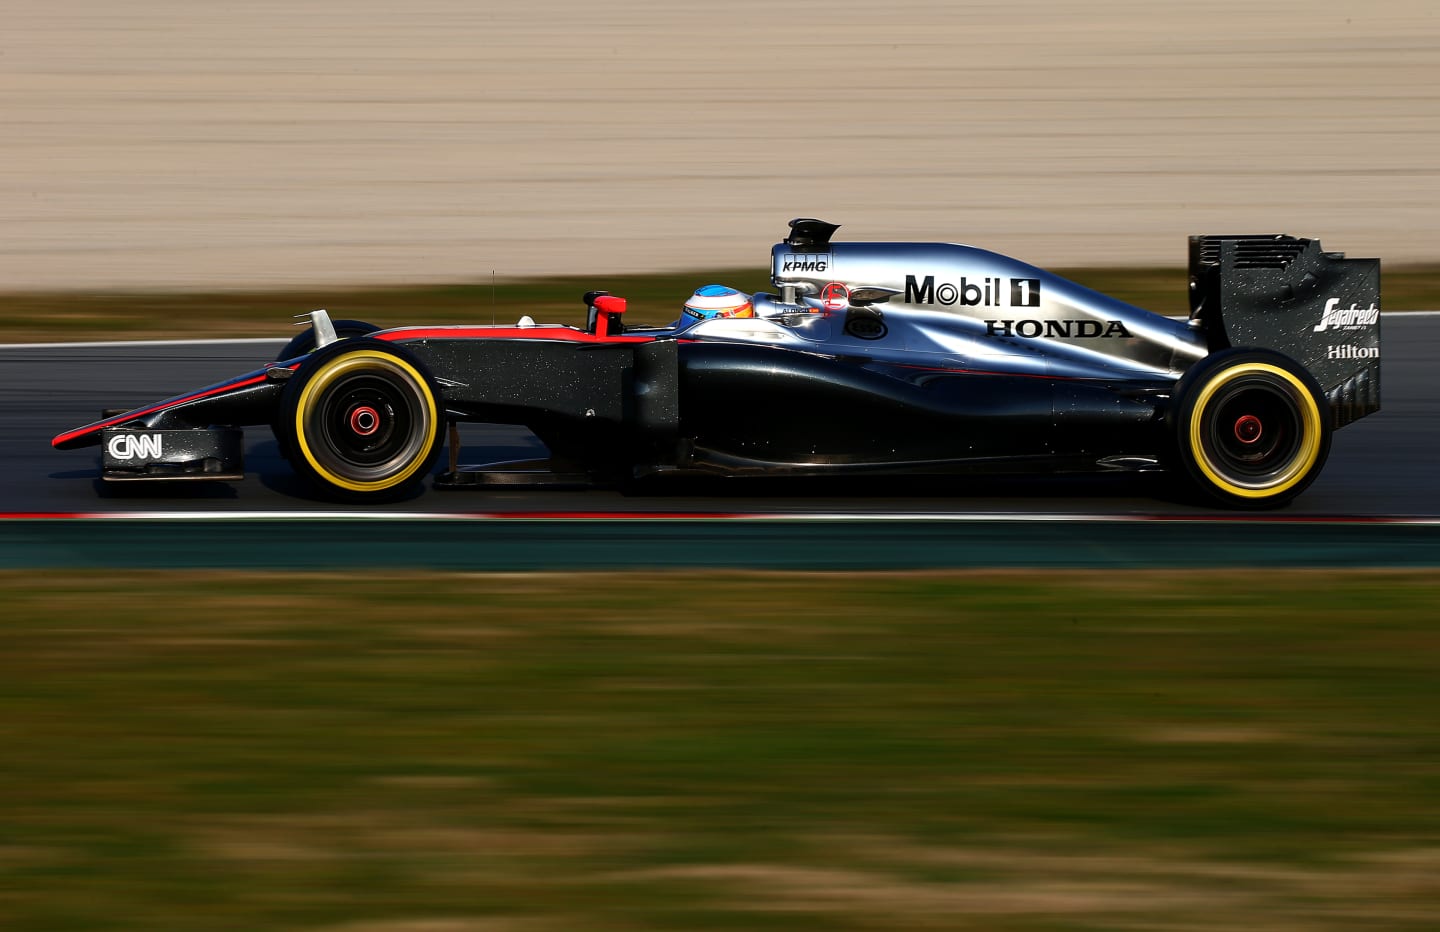 McLaren's performance that season, whether in chrome or black, ensured that this livery would not be a classic